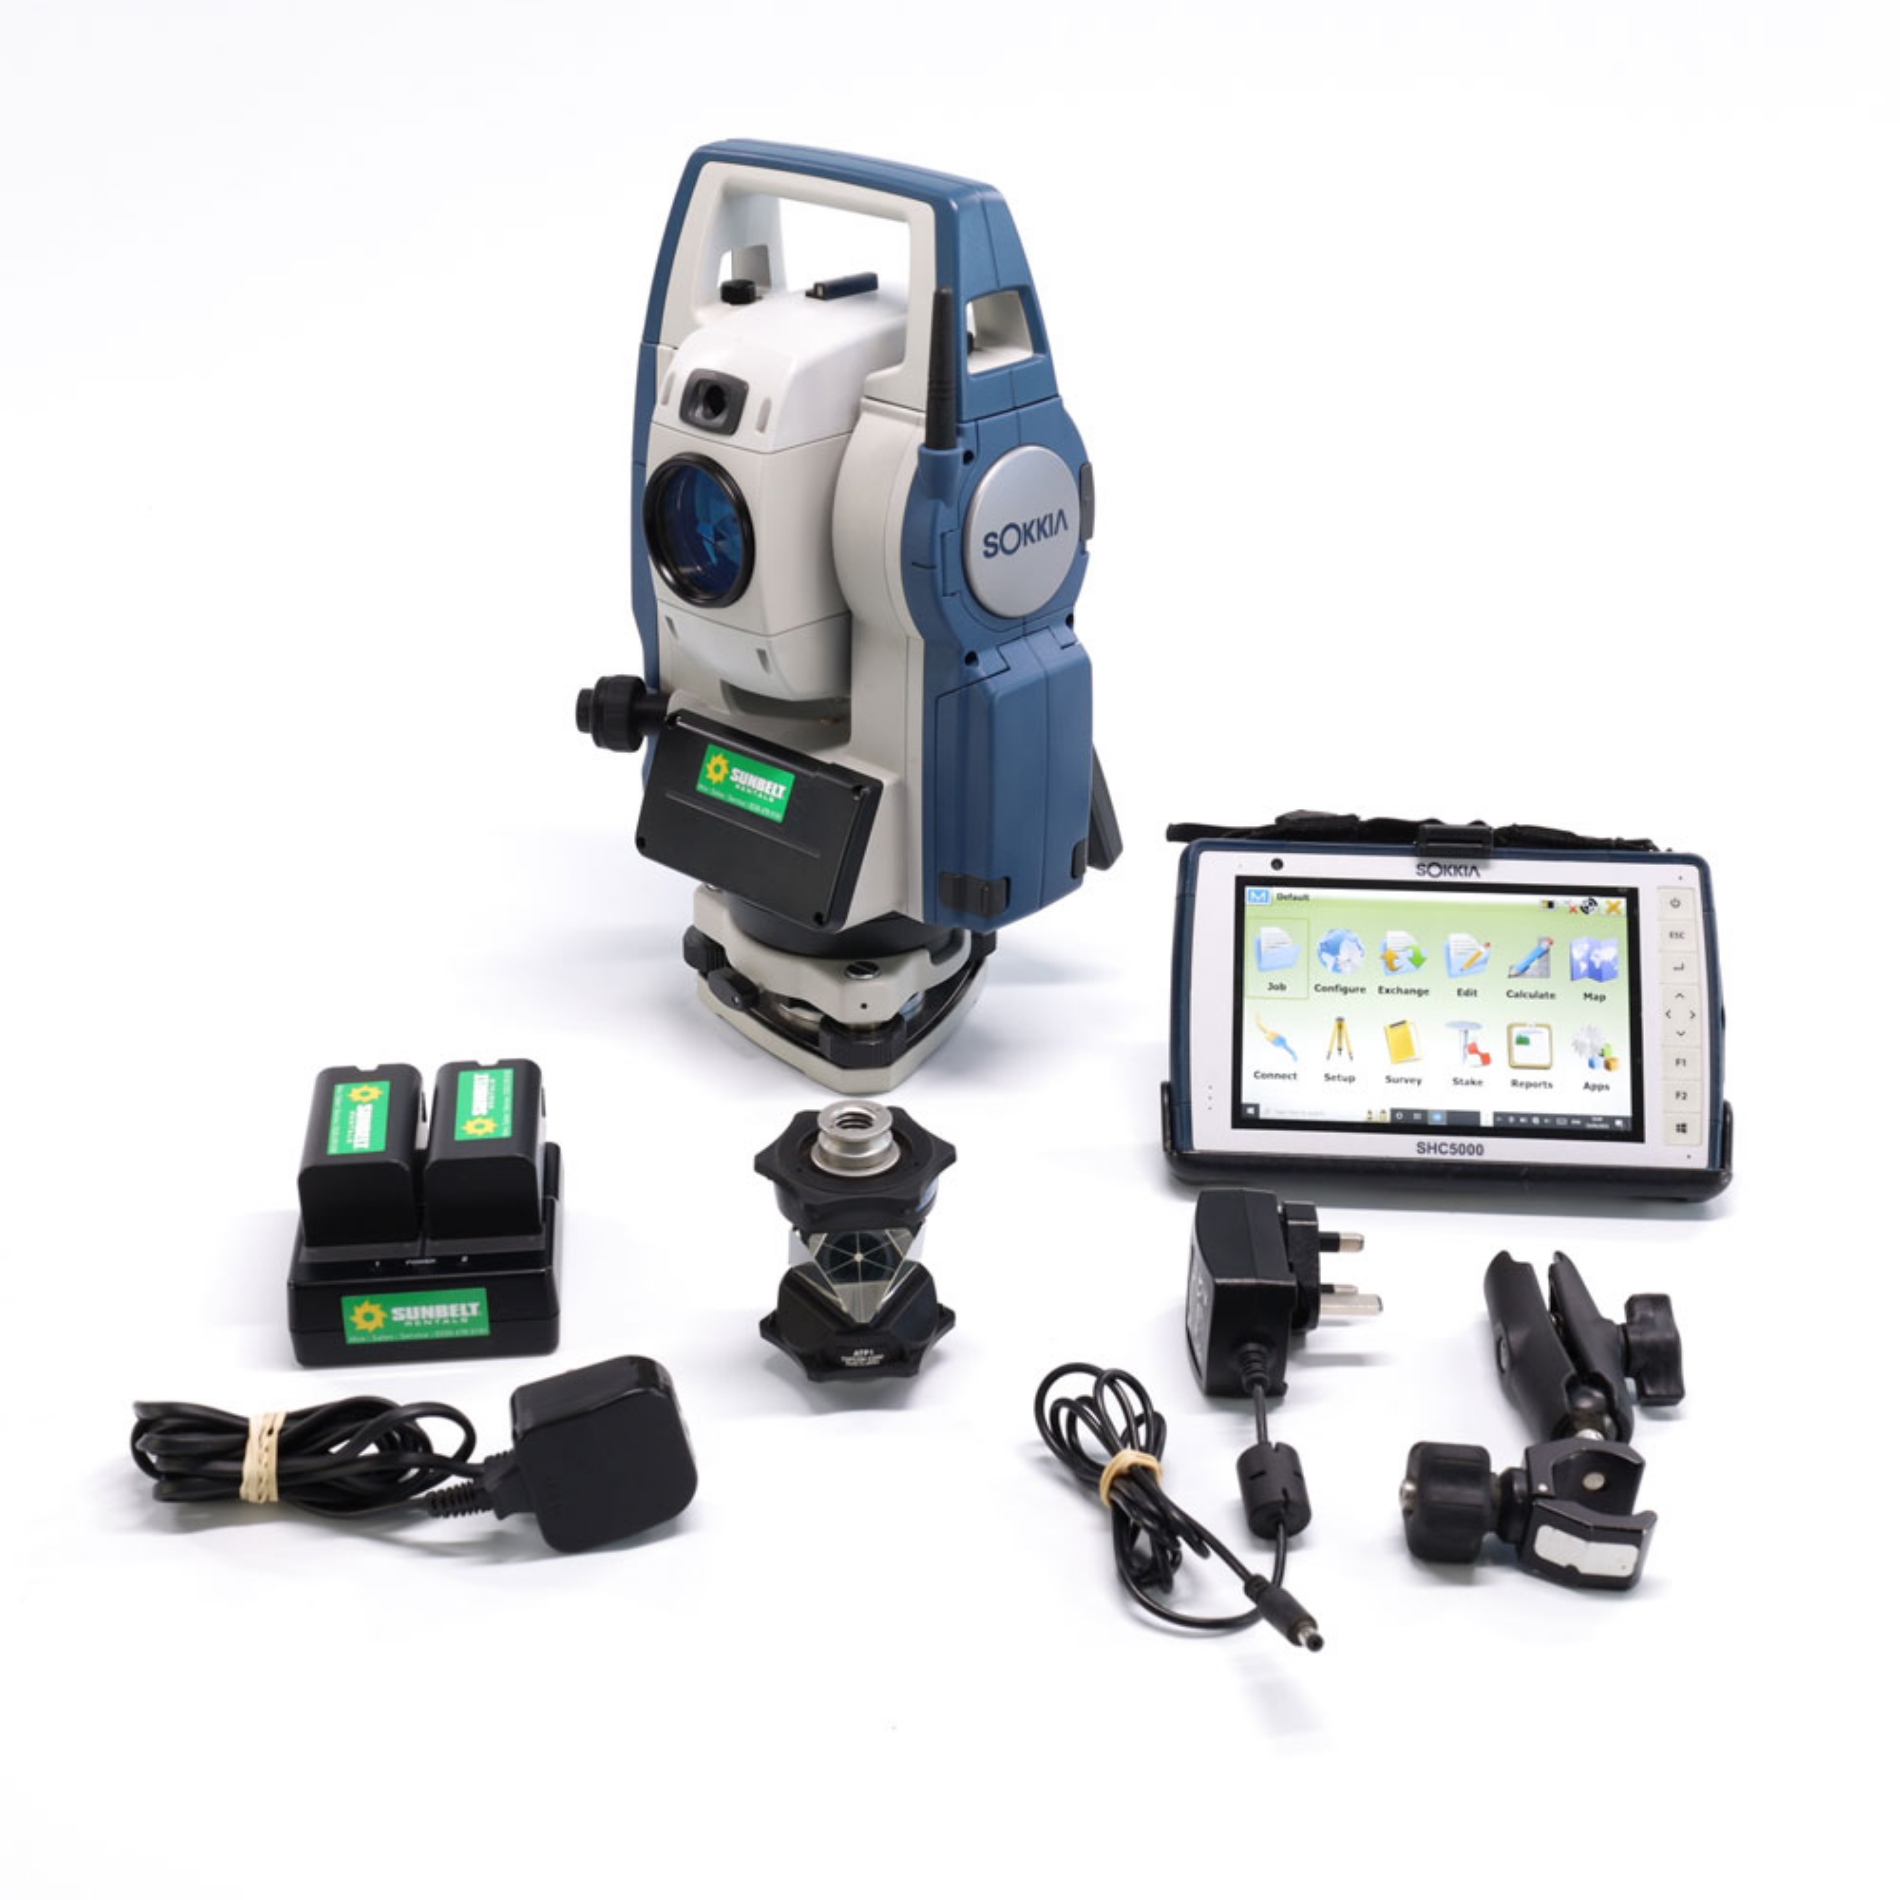 Sokkia DX-103AC Total Station with SHC-5000 Tablet